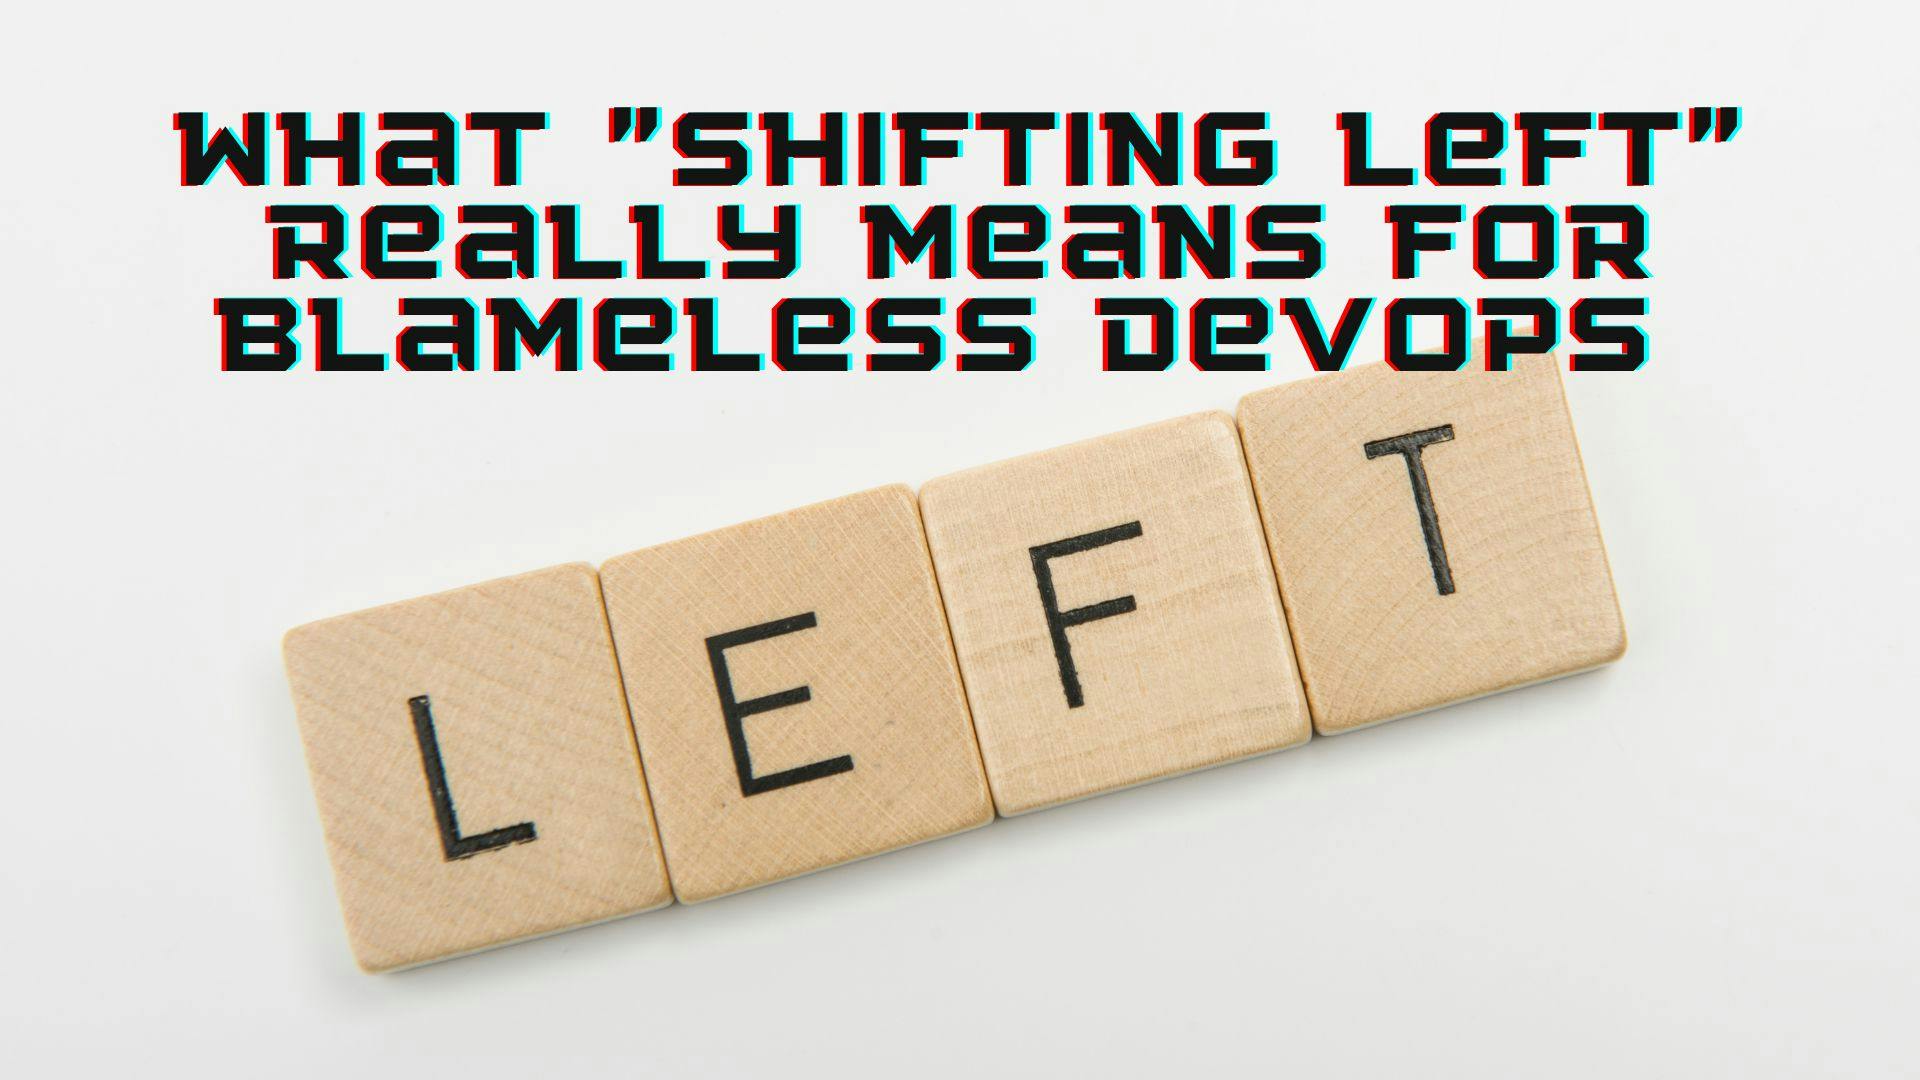 featured image - What "Shifting Left" in Software Really Means for Blameless DevOps